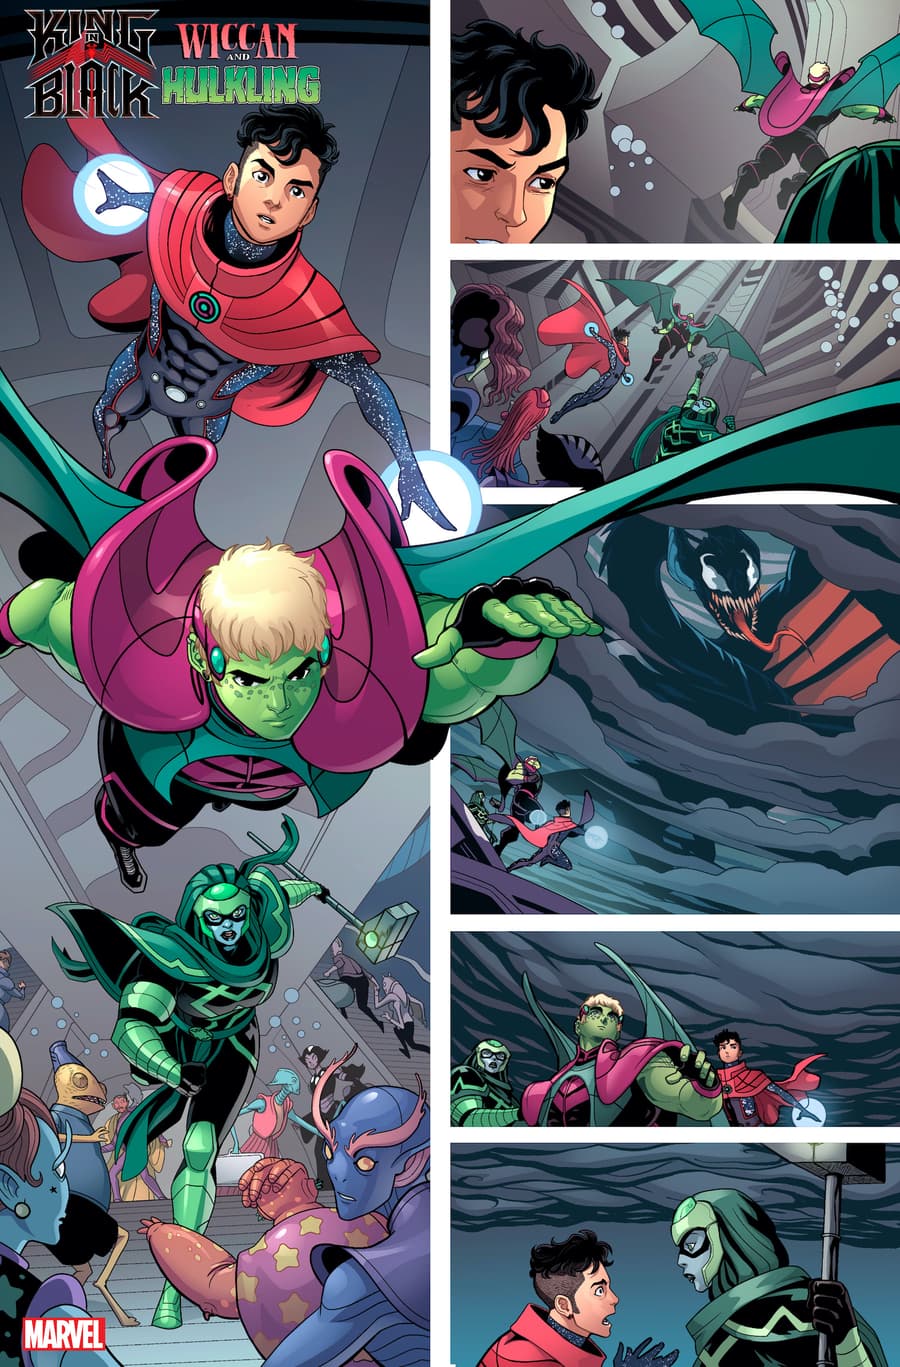 KING IN BLACK: WICCAN AND HULKLING #1 preview art by Luciano Vecchio with colors by Espen Grundetjern